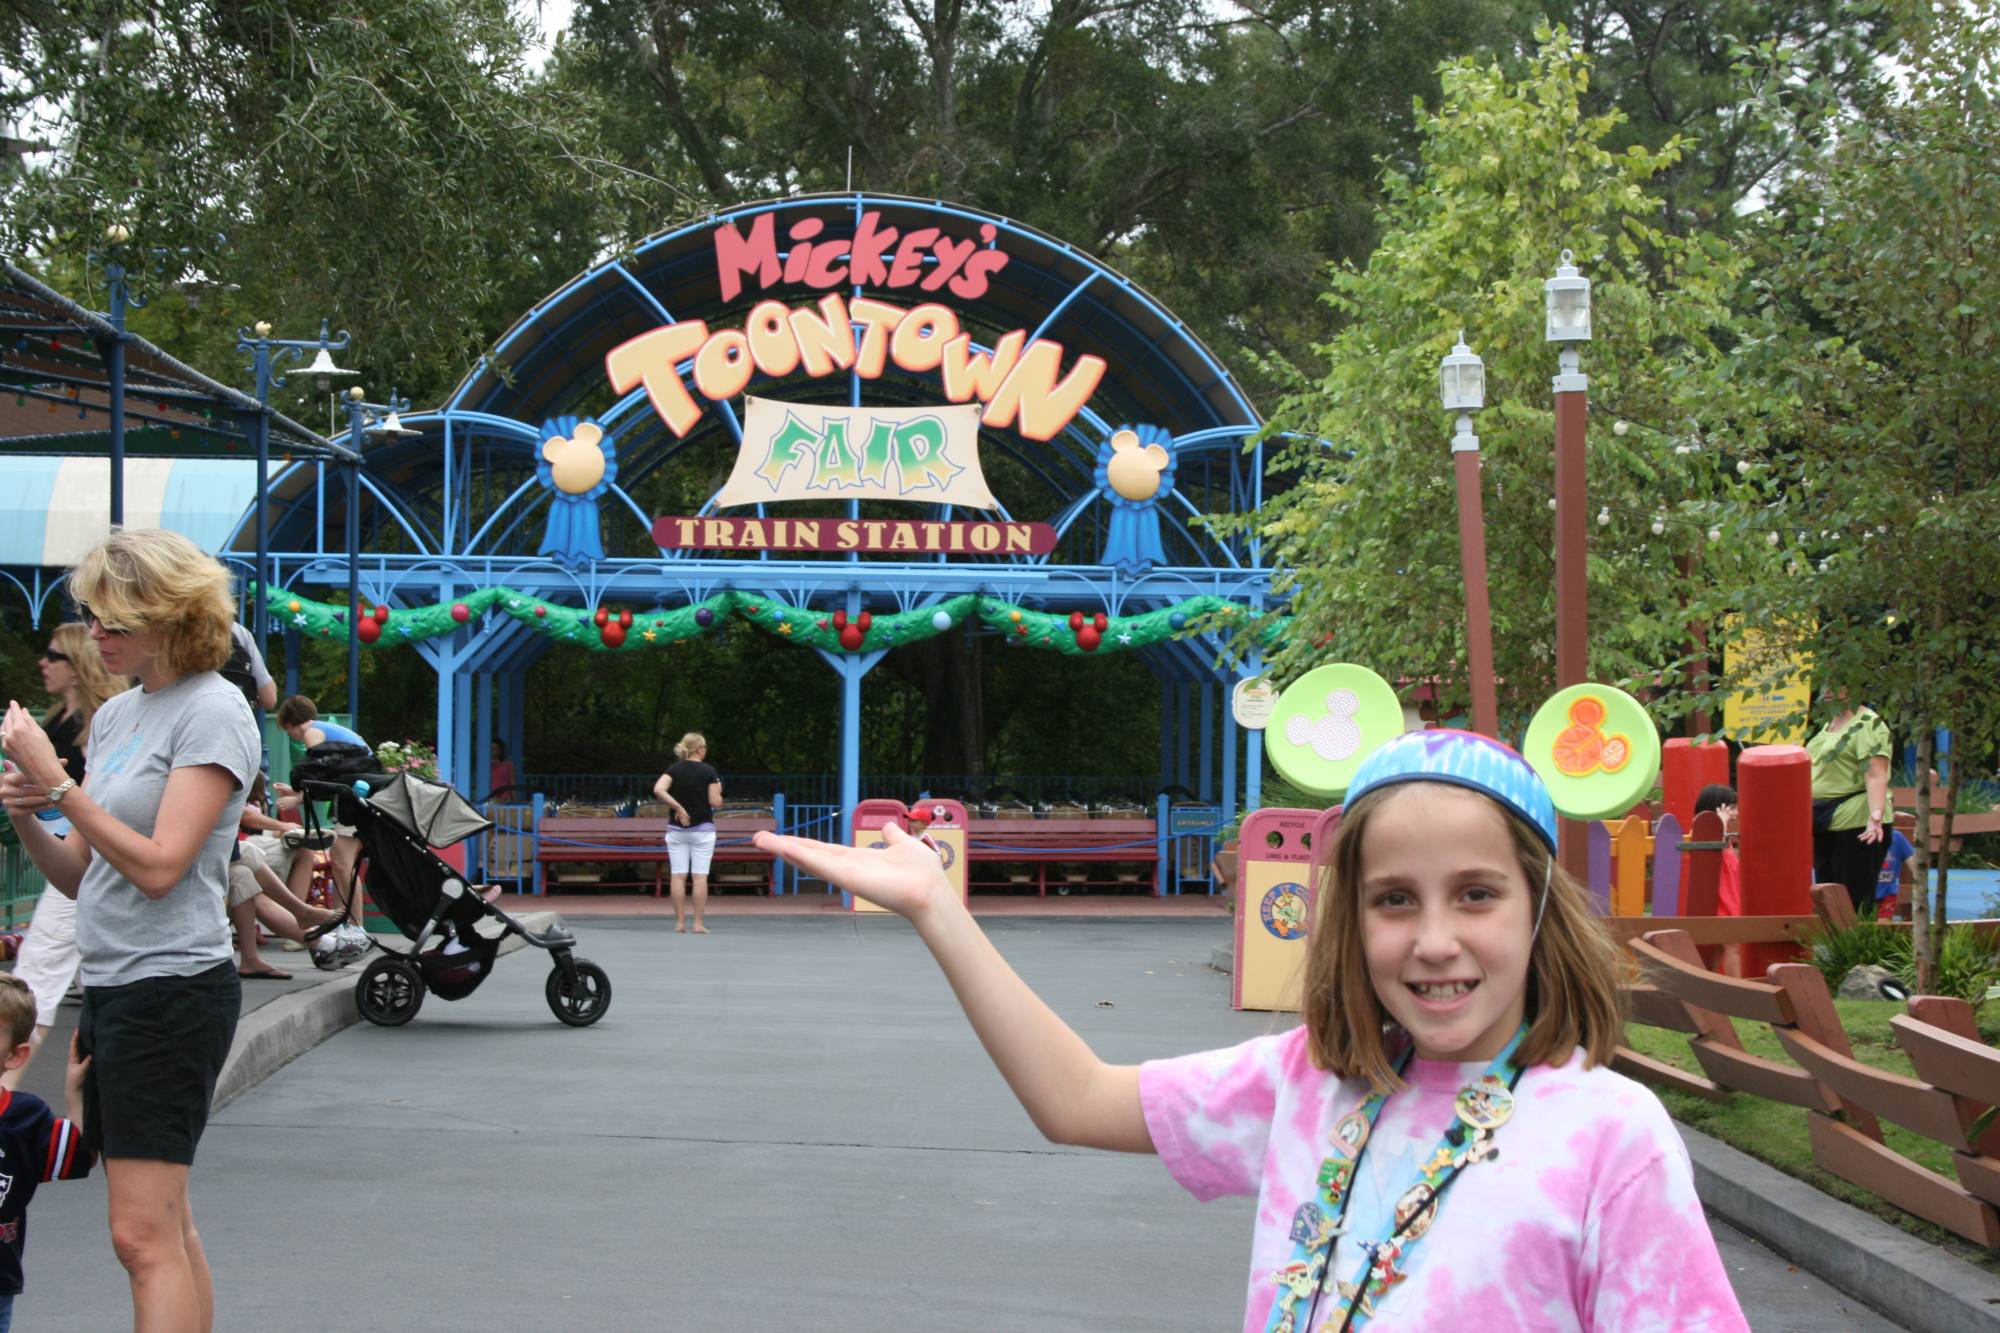 The end of an era: Mickey's Toontown Train Station